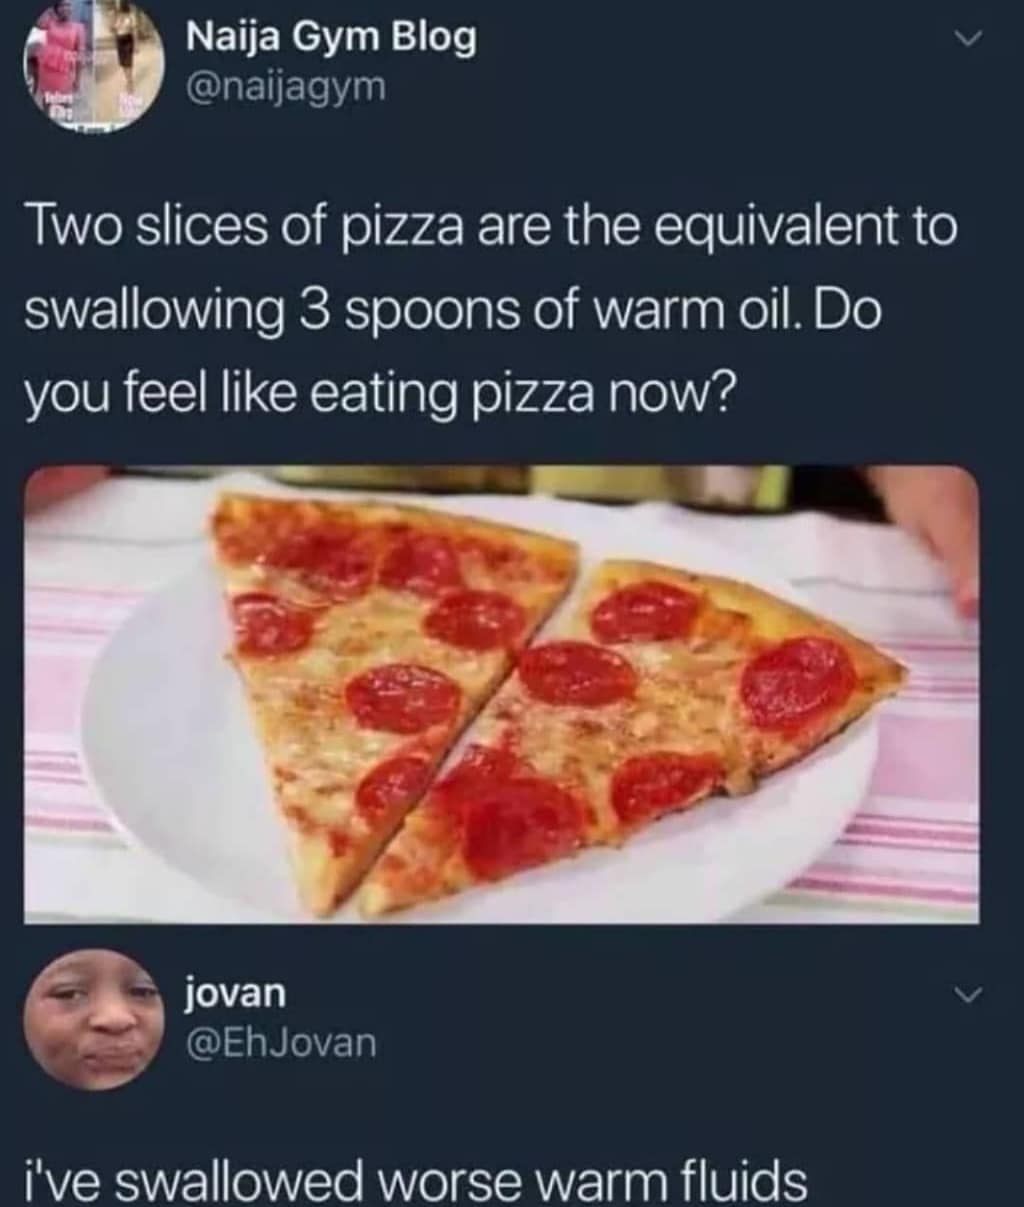 oil in pizza meme - Naija Gym Blog Two slices of pizza are the equivalent to swallowing 3 spoons of warm oil. Do you feel eating pizza now? jovan i've swallowed worse warm fluids